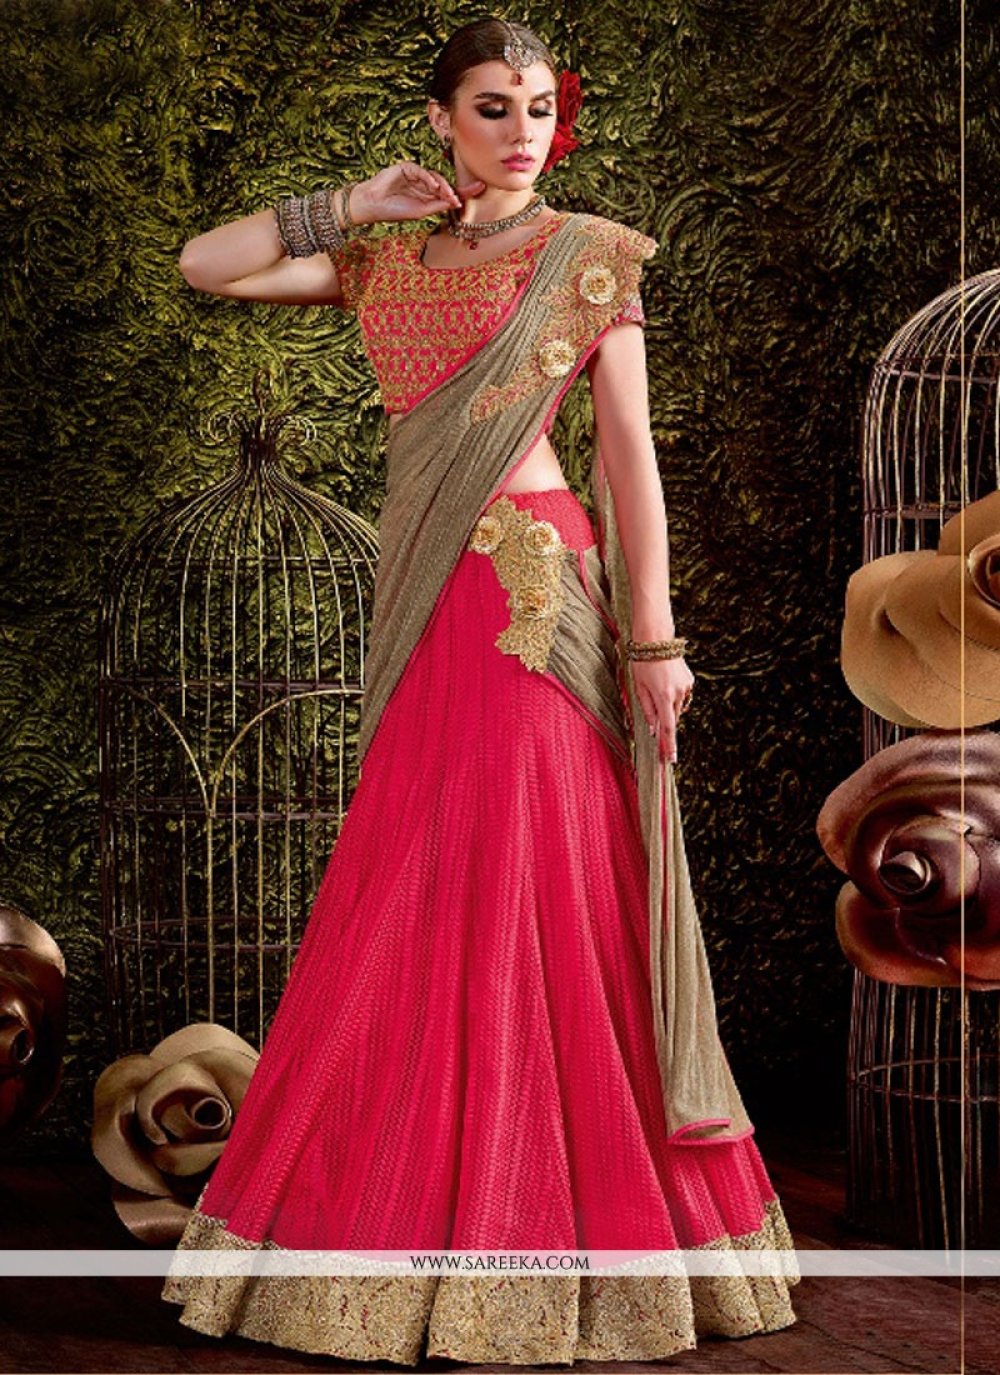 Collection of Indian Dresses, Accessories & Clothing in Ethnic Fashion |  Lehenga style saree, Indian dresses, Party wear sarees online